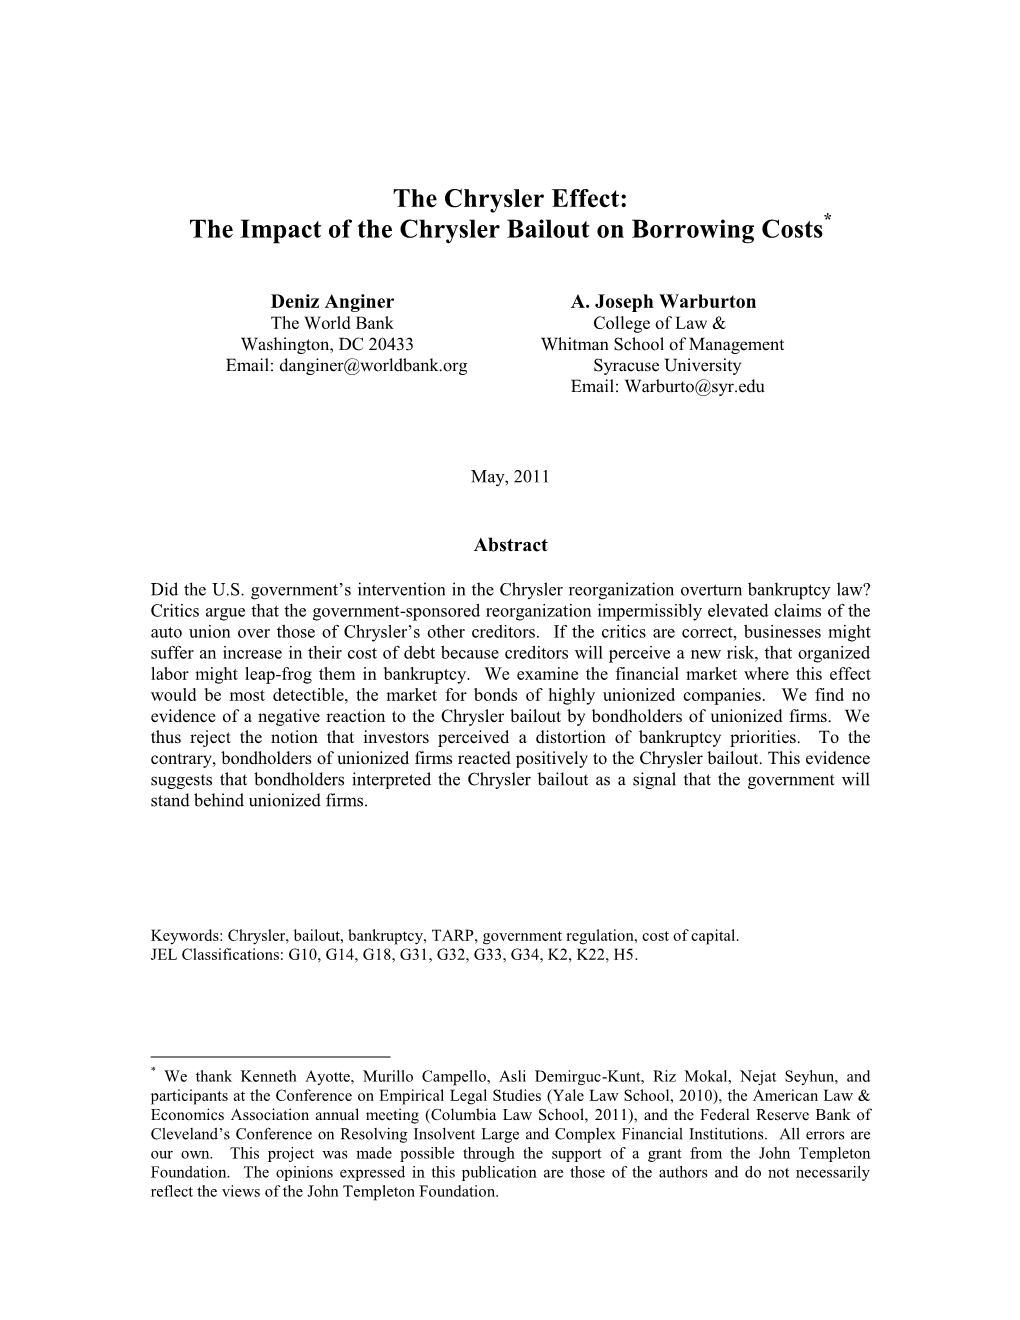 The Impact of the Chrysler Bailout on Borrowing Costs*